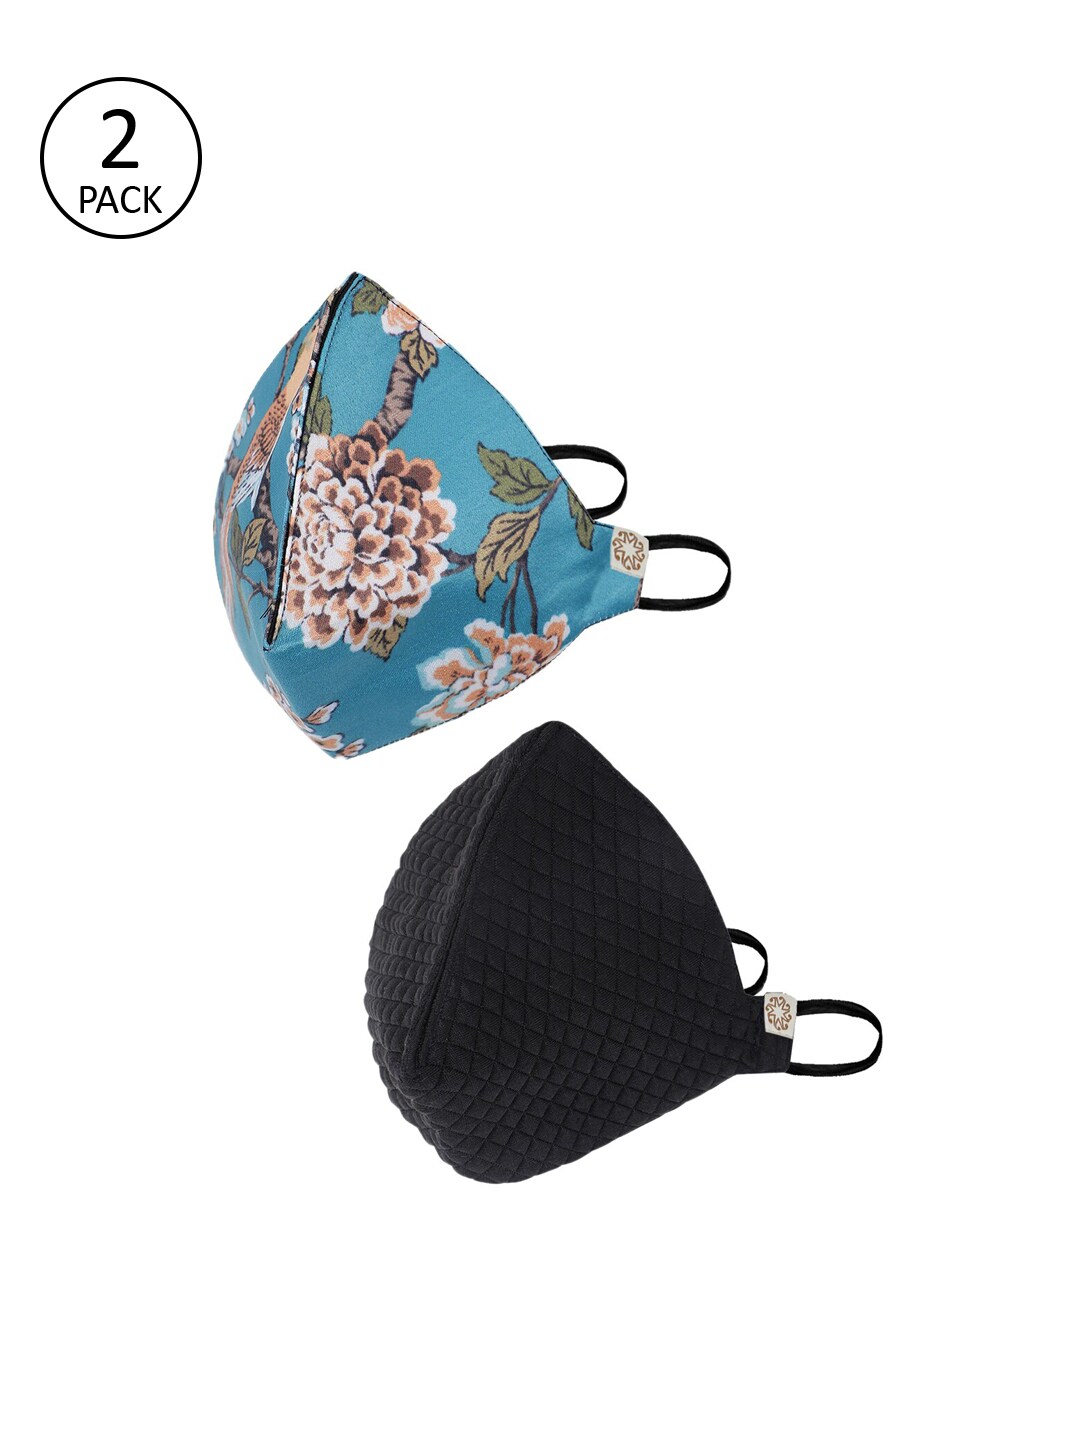 VASTRAMAY Unisex 2 Pcs 4-Ply Reusable Outdoor Fashion Masks With Fible Potli Bag Price in India